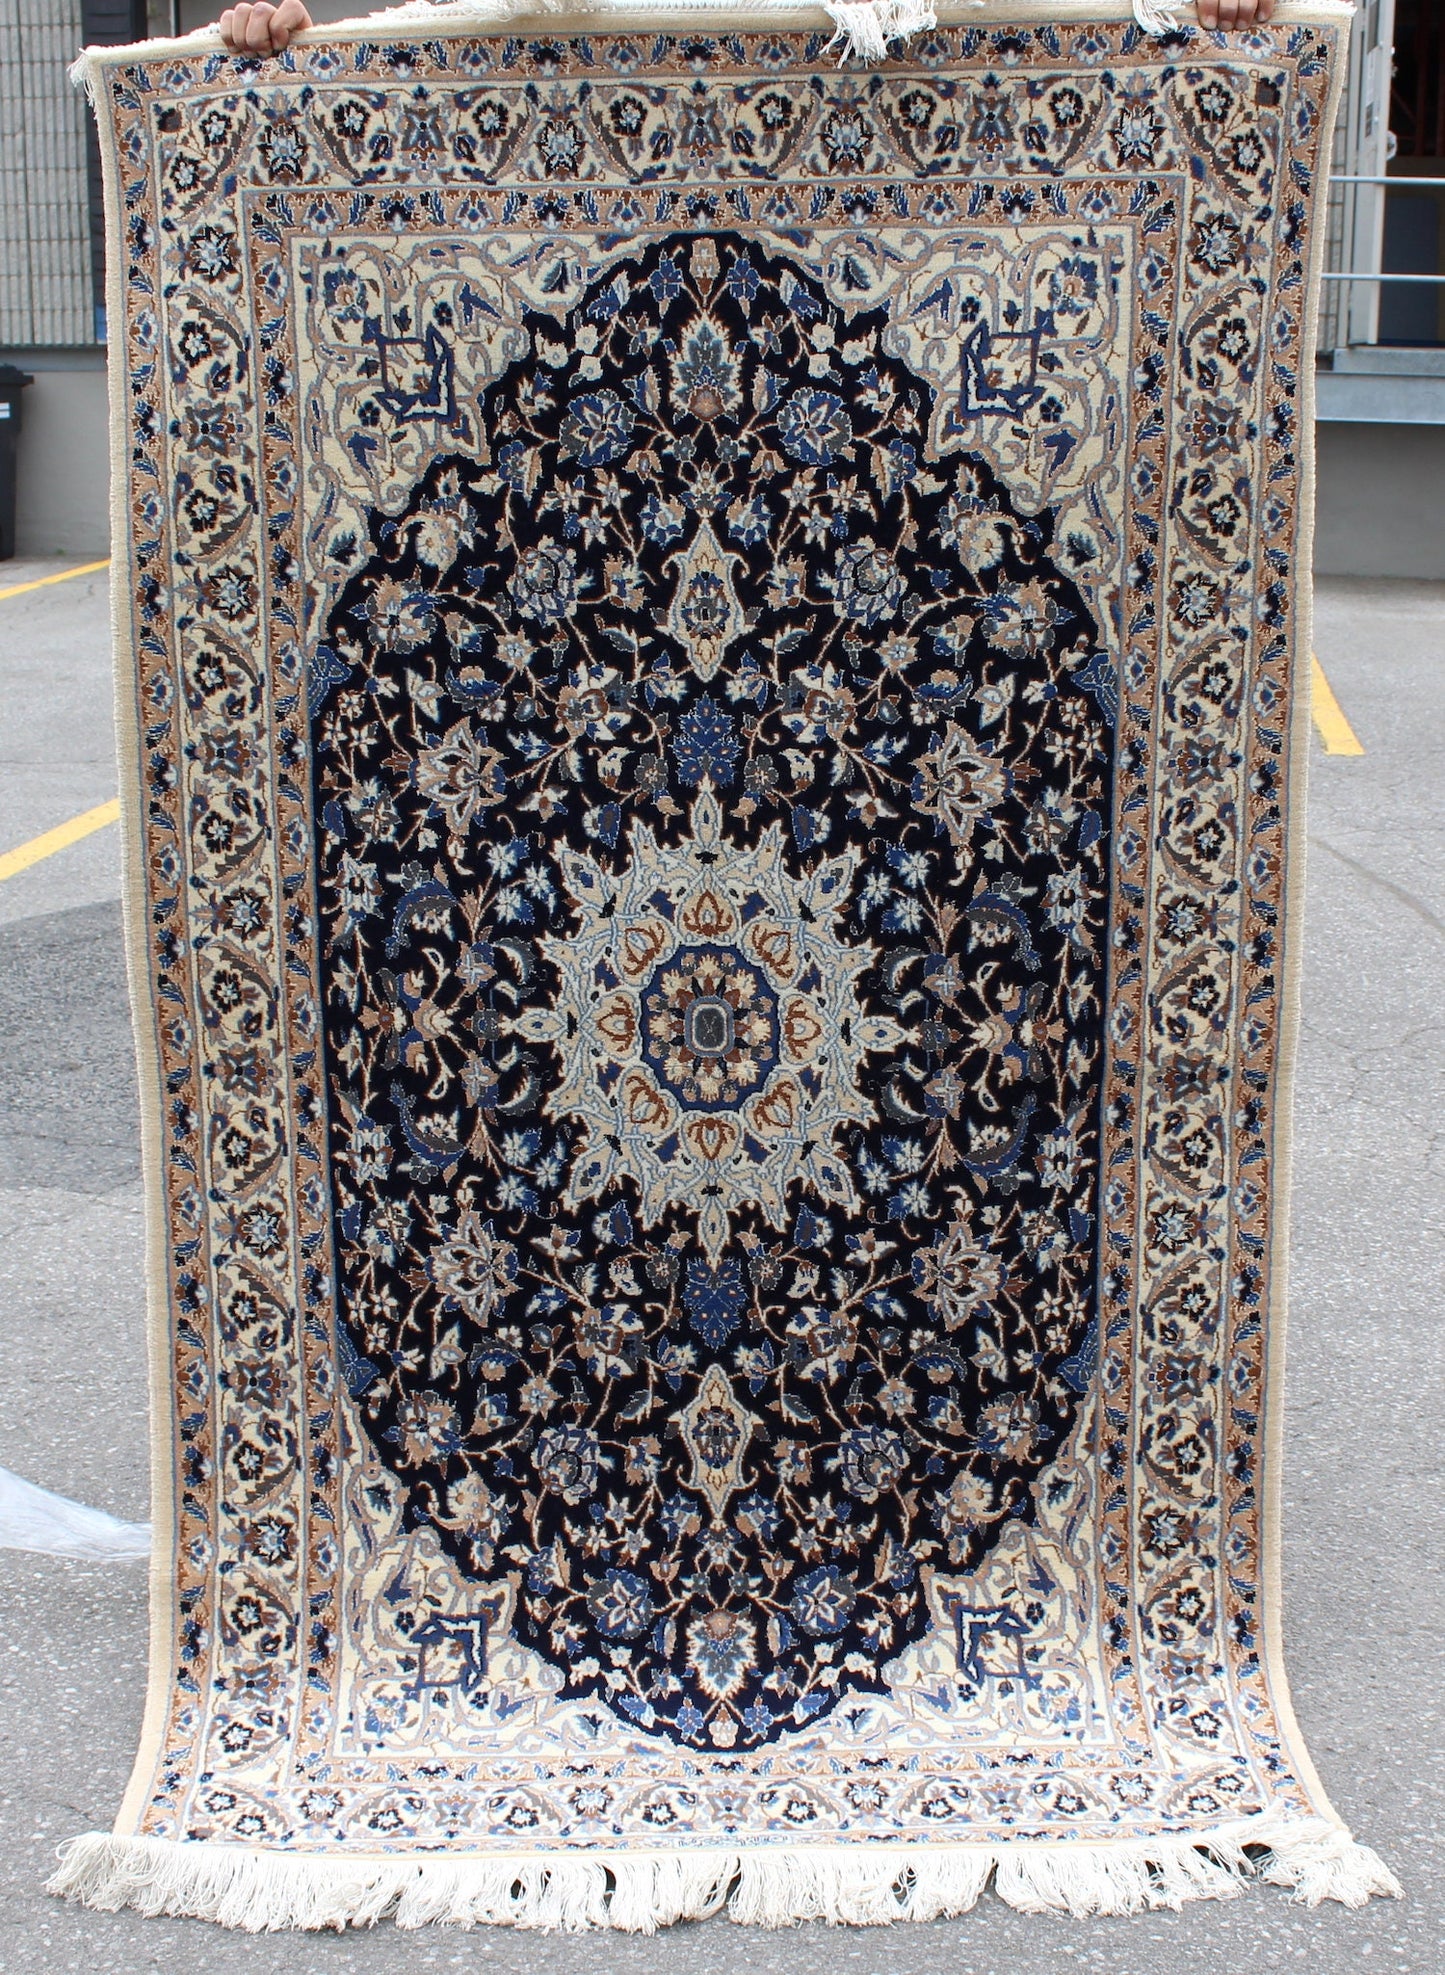 Antique Persian Blue 4x6 Medallion Rug | Traditional Oriental Design | Thick Wool Pile With Blue and Beige Details | Hand Knotted